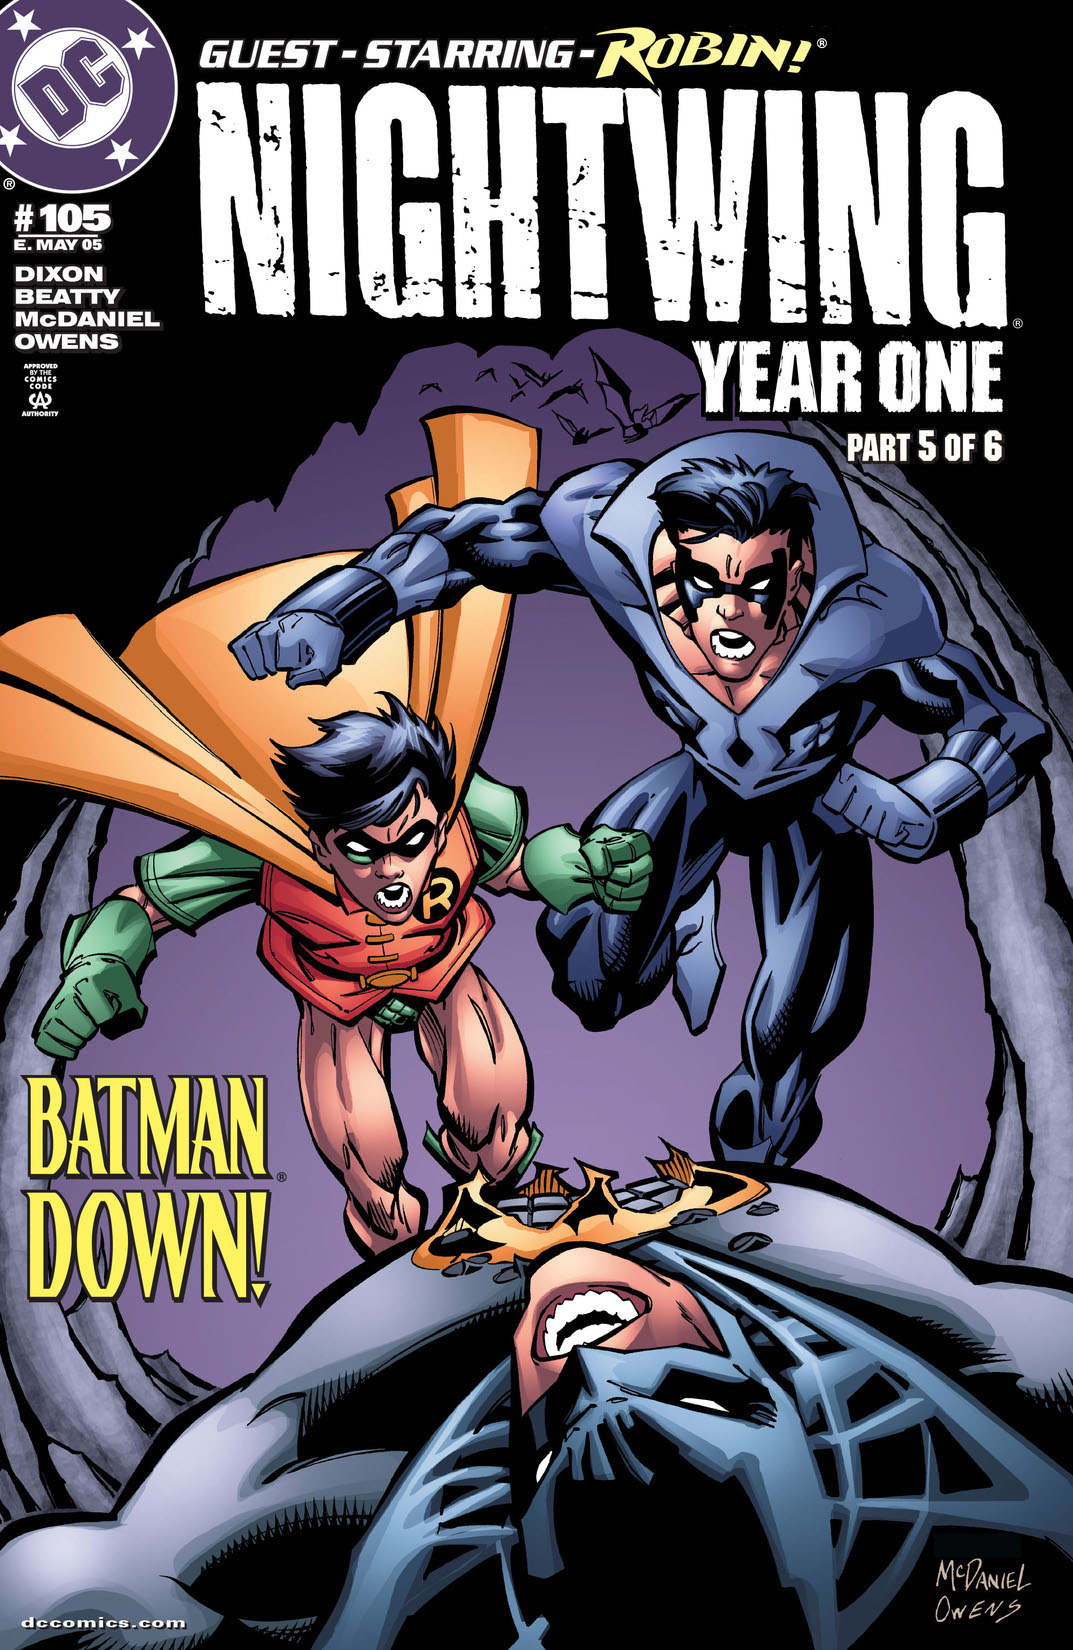 Nightwing (1996-) #105 preview images